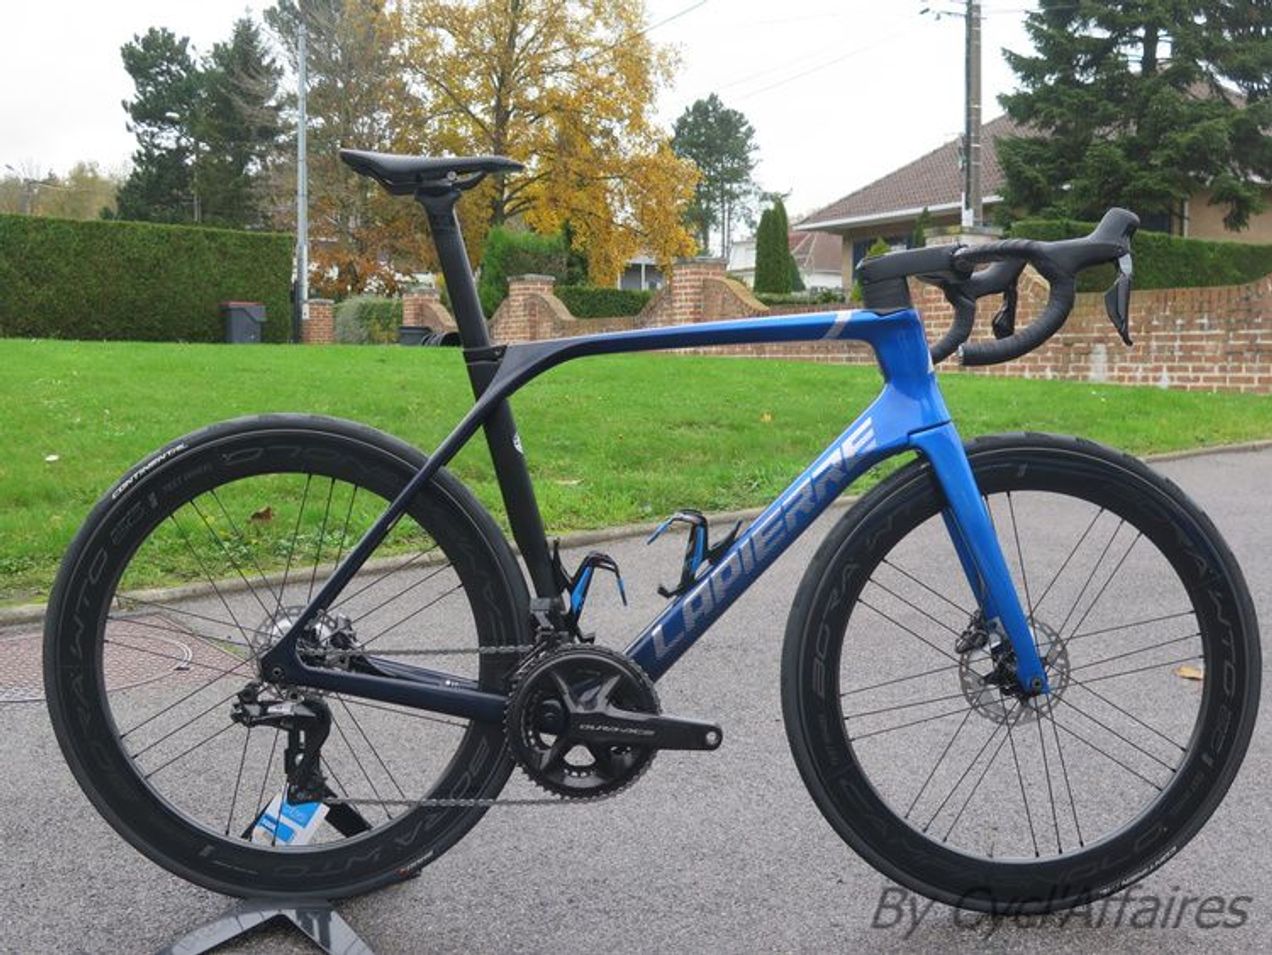 Lapierre Aircode DRS 9.0 used in 56 cm | buycycle LT